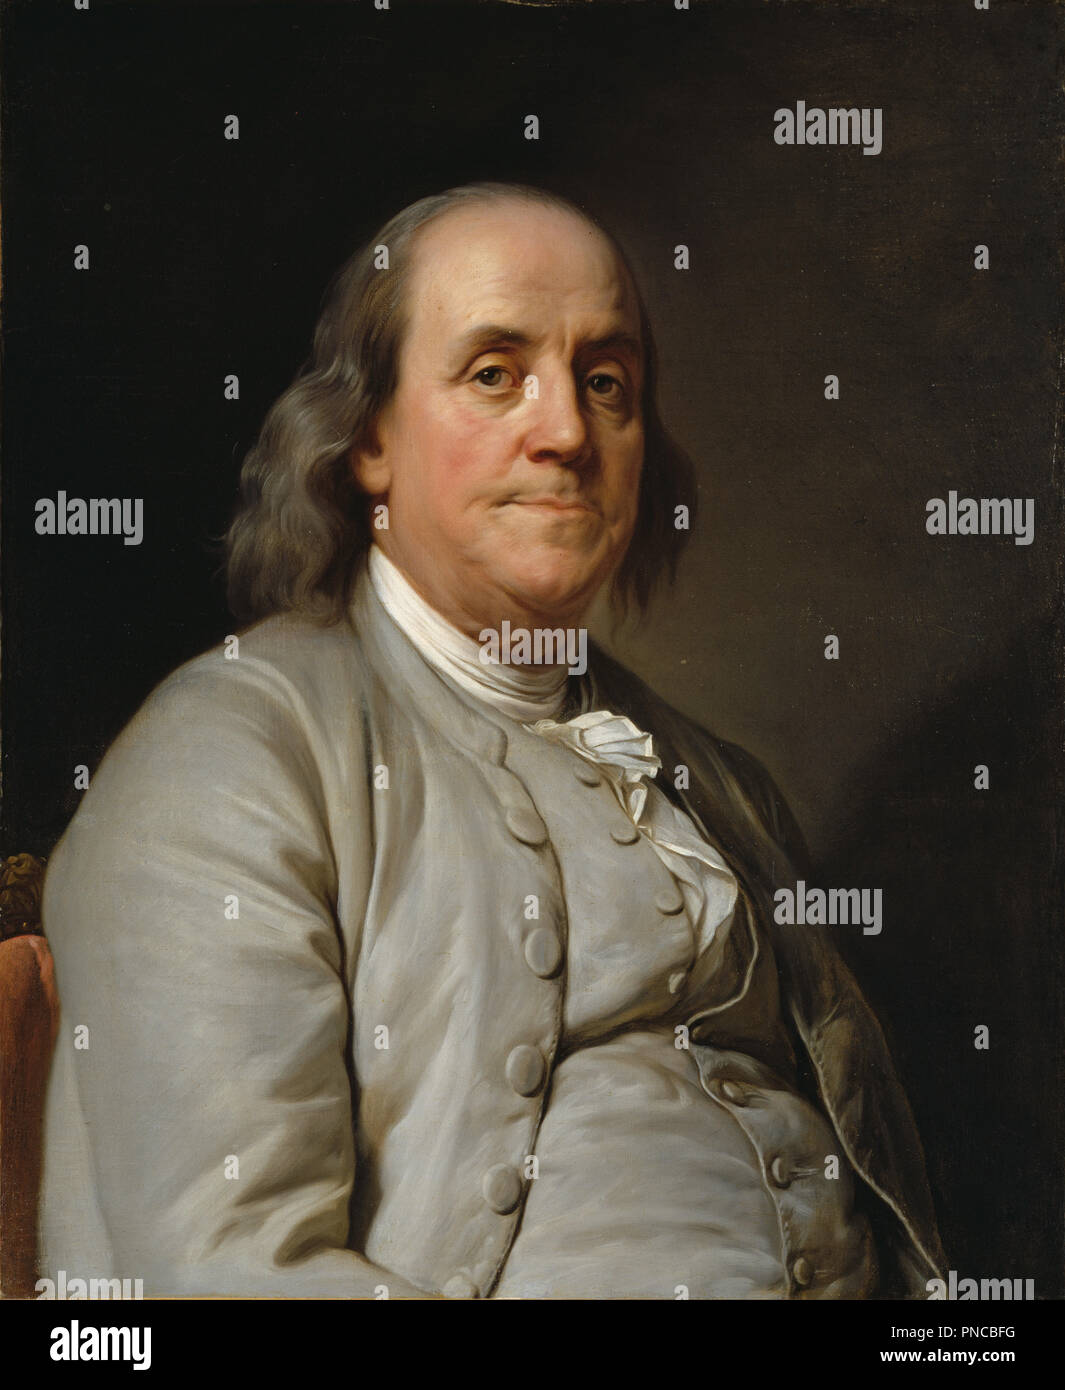 Benjamin Franklin. Date/Period: Ca. 1785. Painting. Oil on canvas. Height: 724 mm (28.50 in); Width: 597 mm (23.50 in). Author: Joseph Duplessis. Joseph Siffred Duplessis. Stock Photo